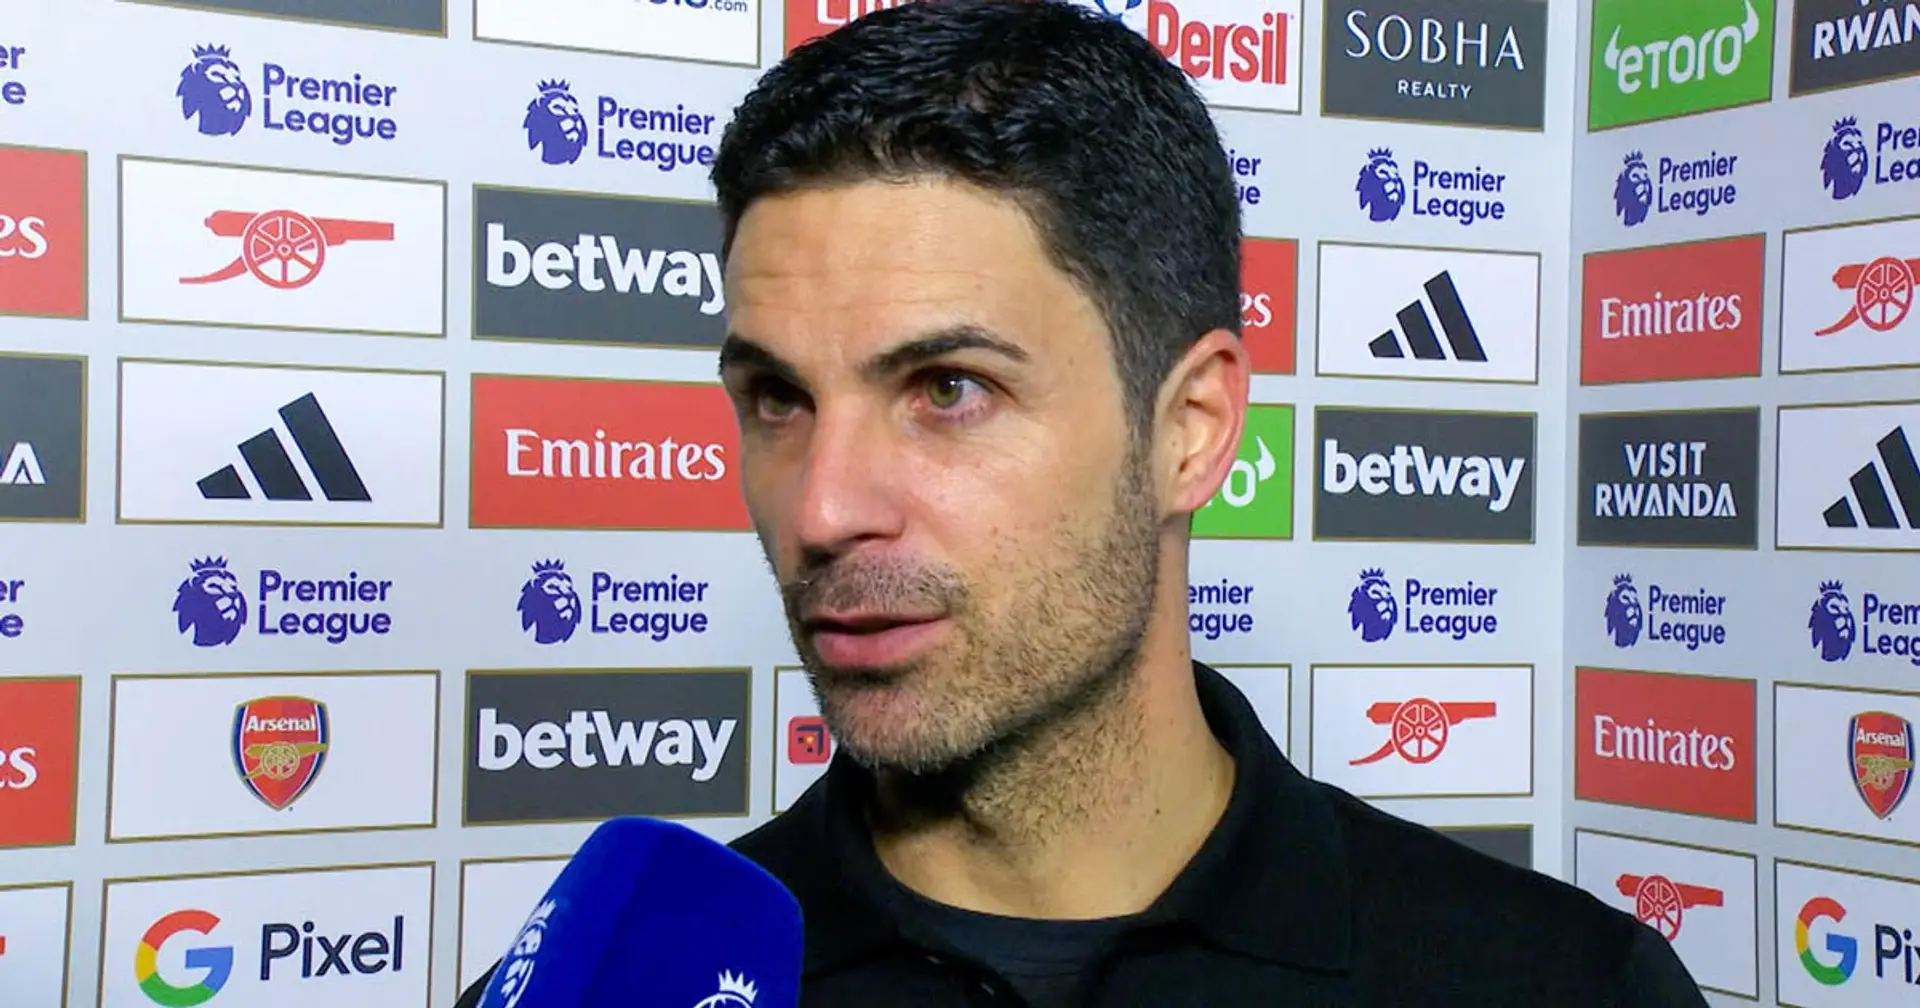 Mikel Arteta on West Ham loss: 'We dominated for 100 minutes'